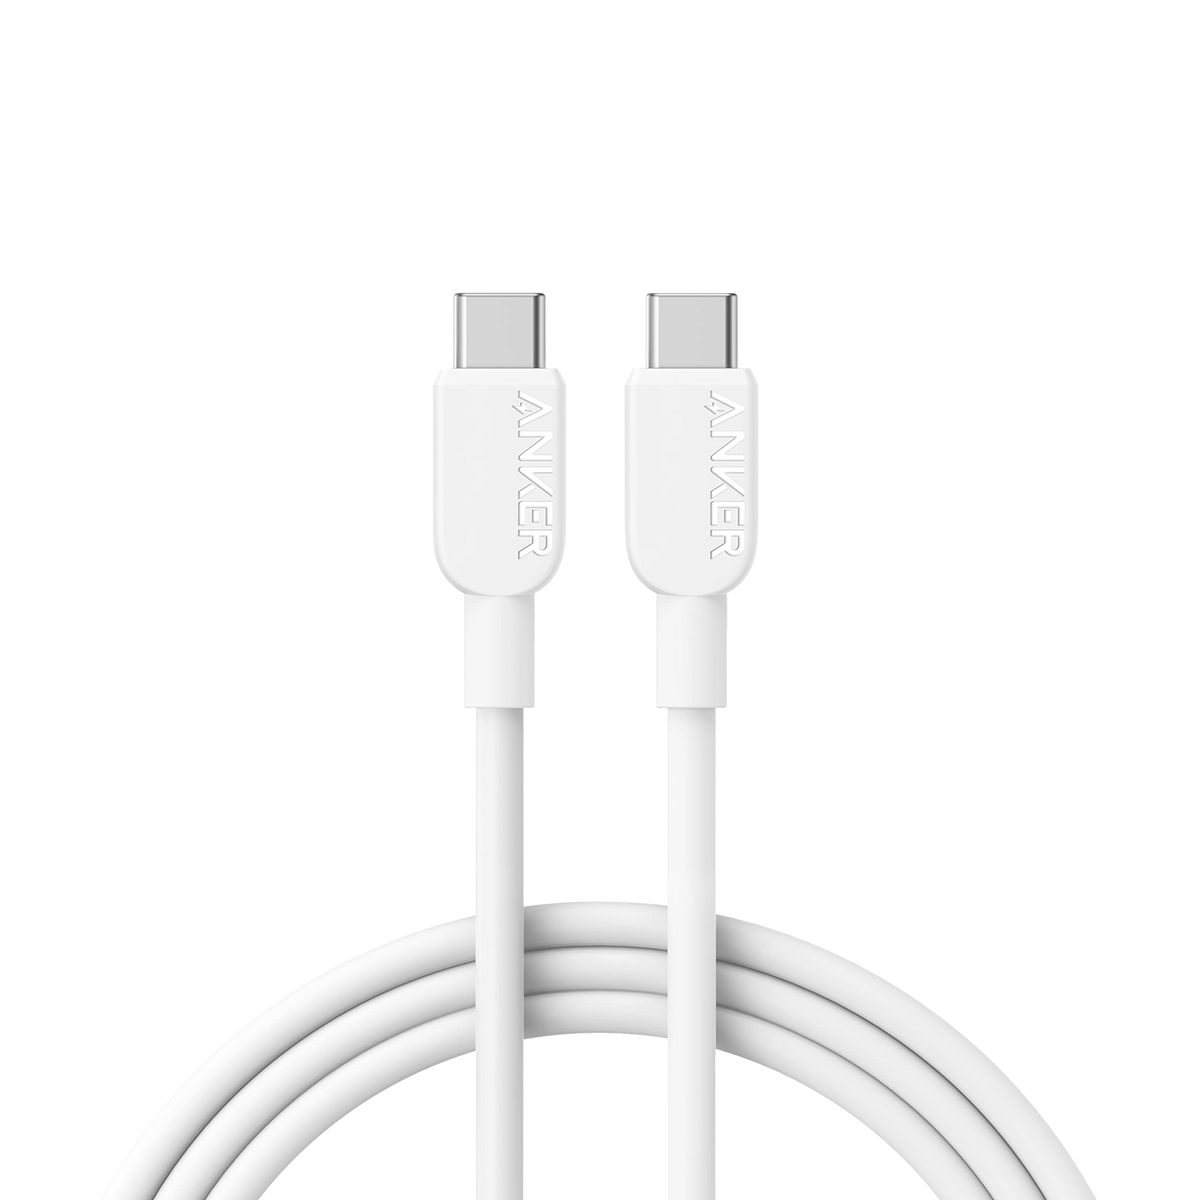 Anker 310 USB C to USB C Cable (6 ft)